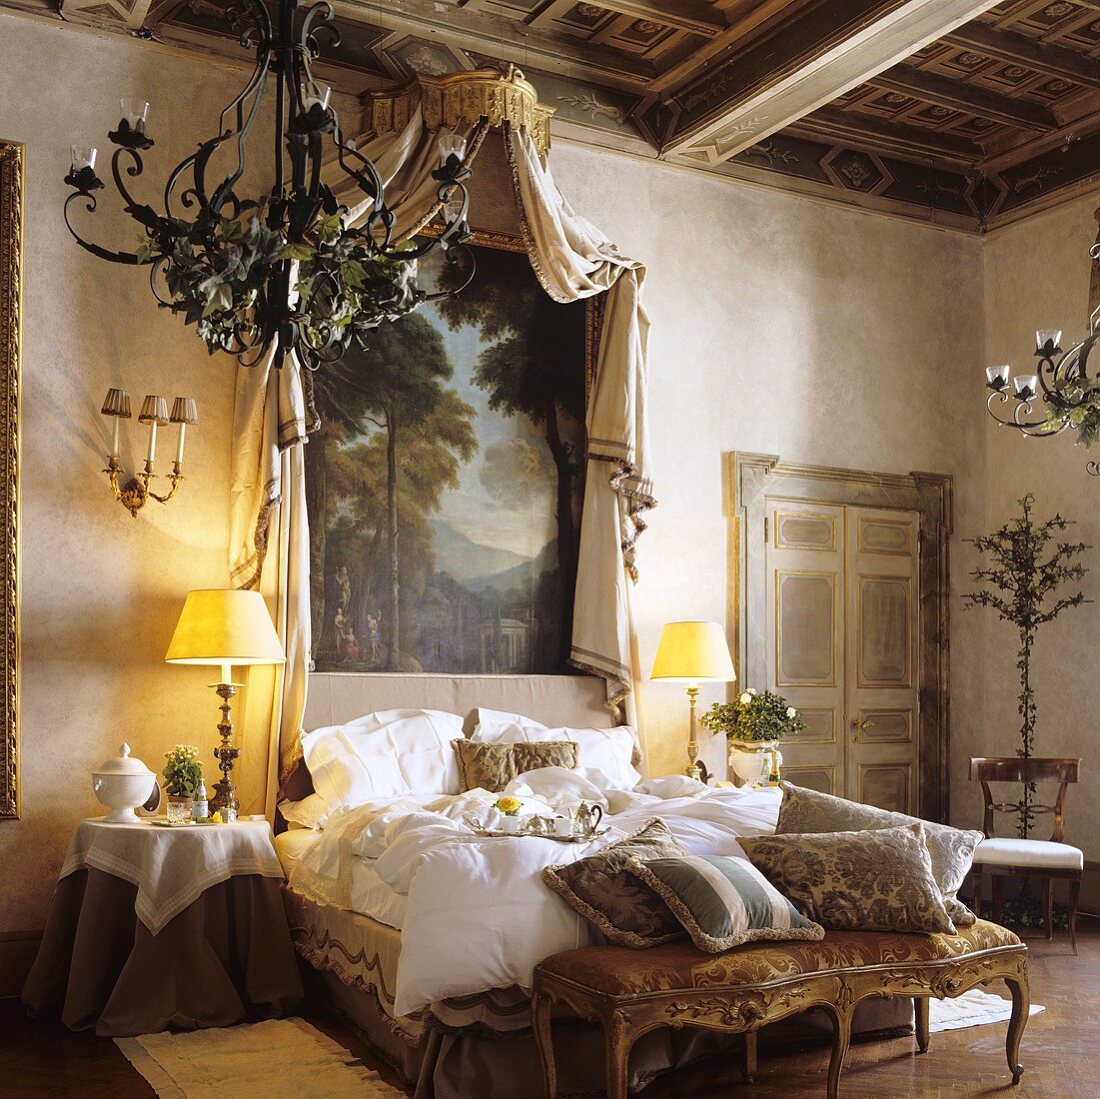 A bedroom in a palazzo with a canopy and an upholstered Rococo-style bench at the foot of the bench